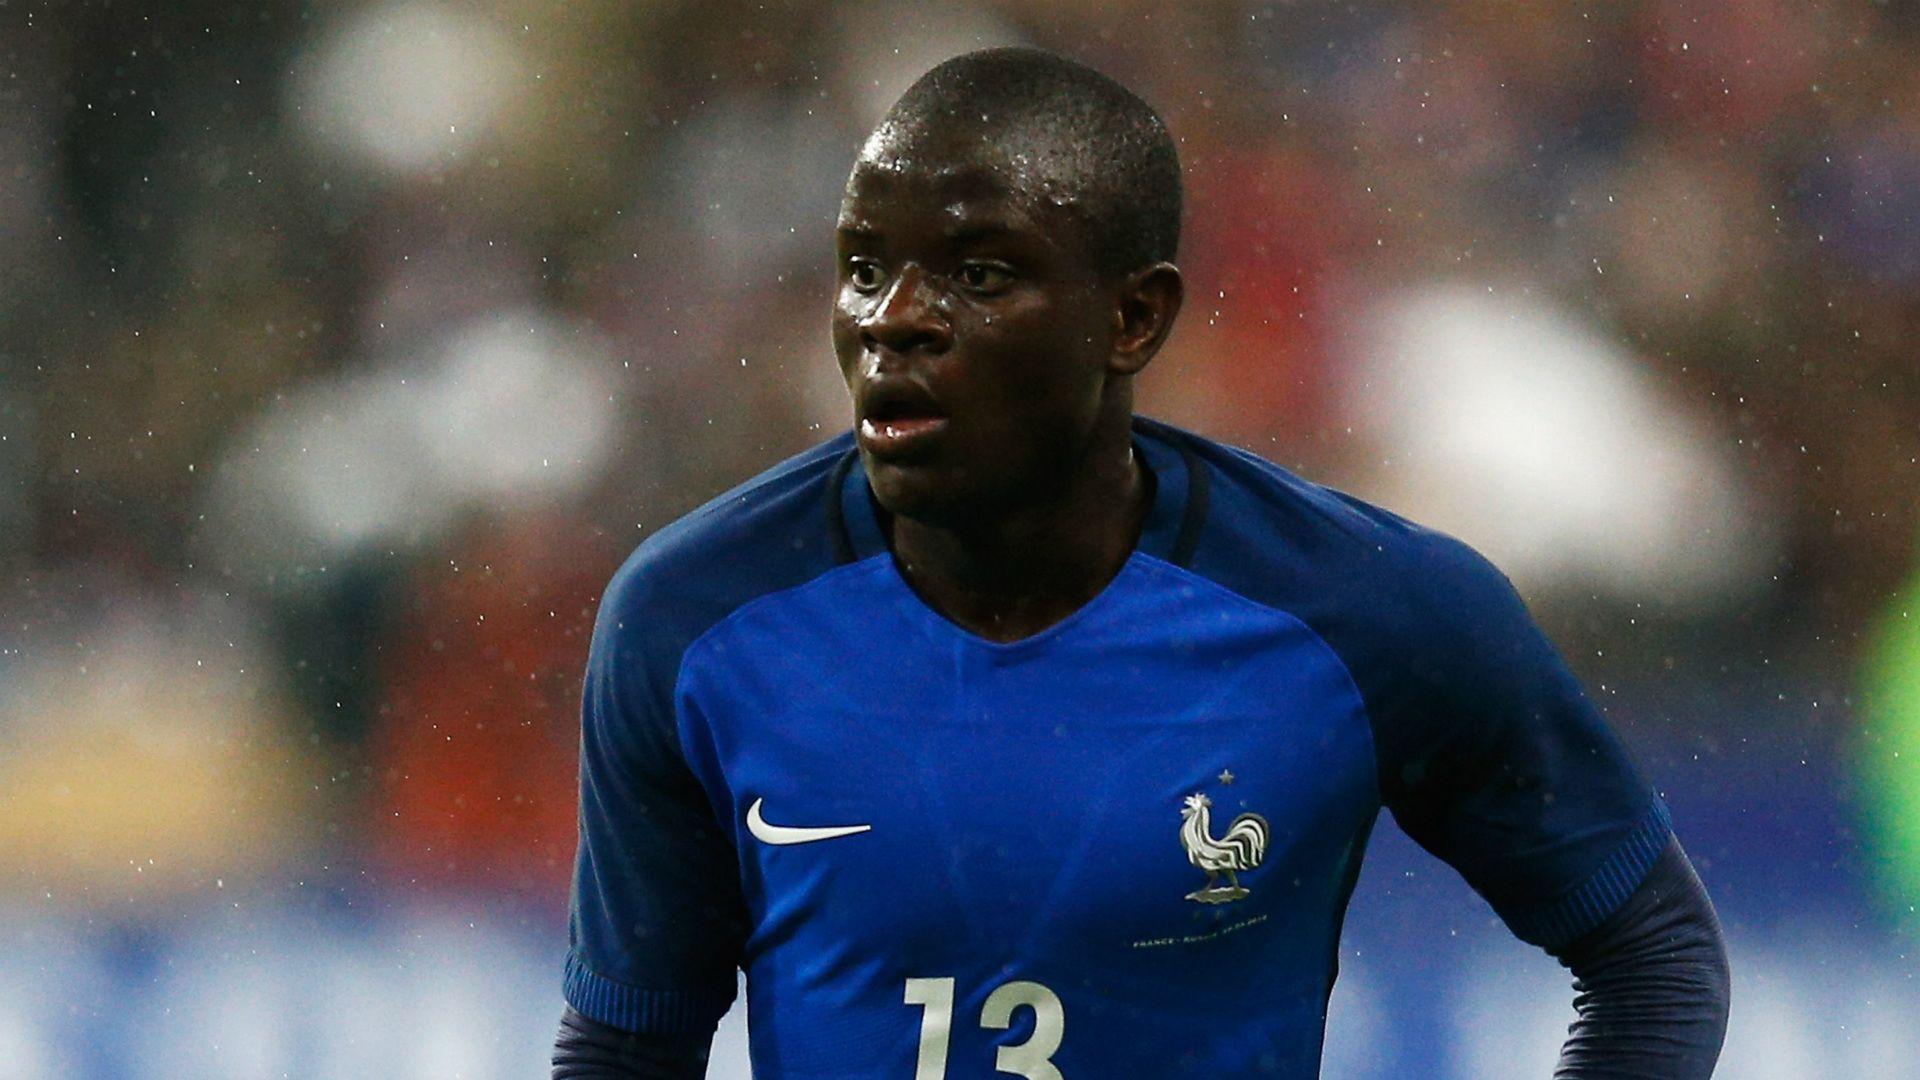 Gary Lineker says N'Golo Kante can make the difference for Chelsea